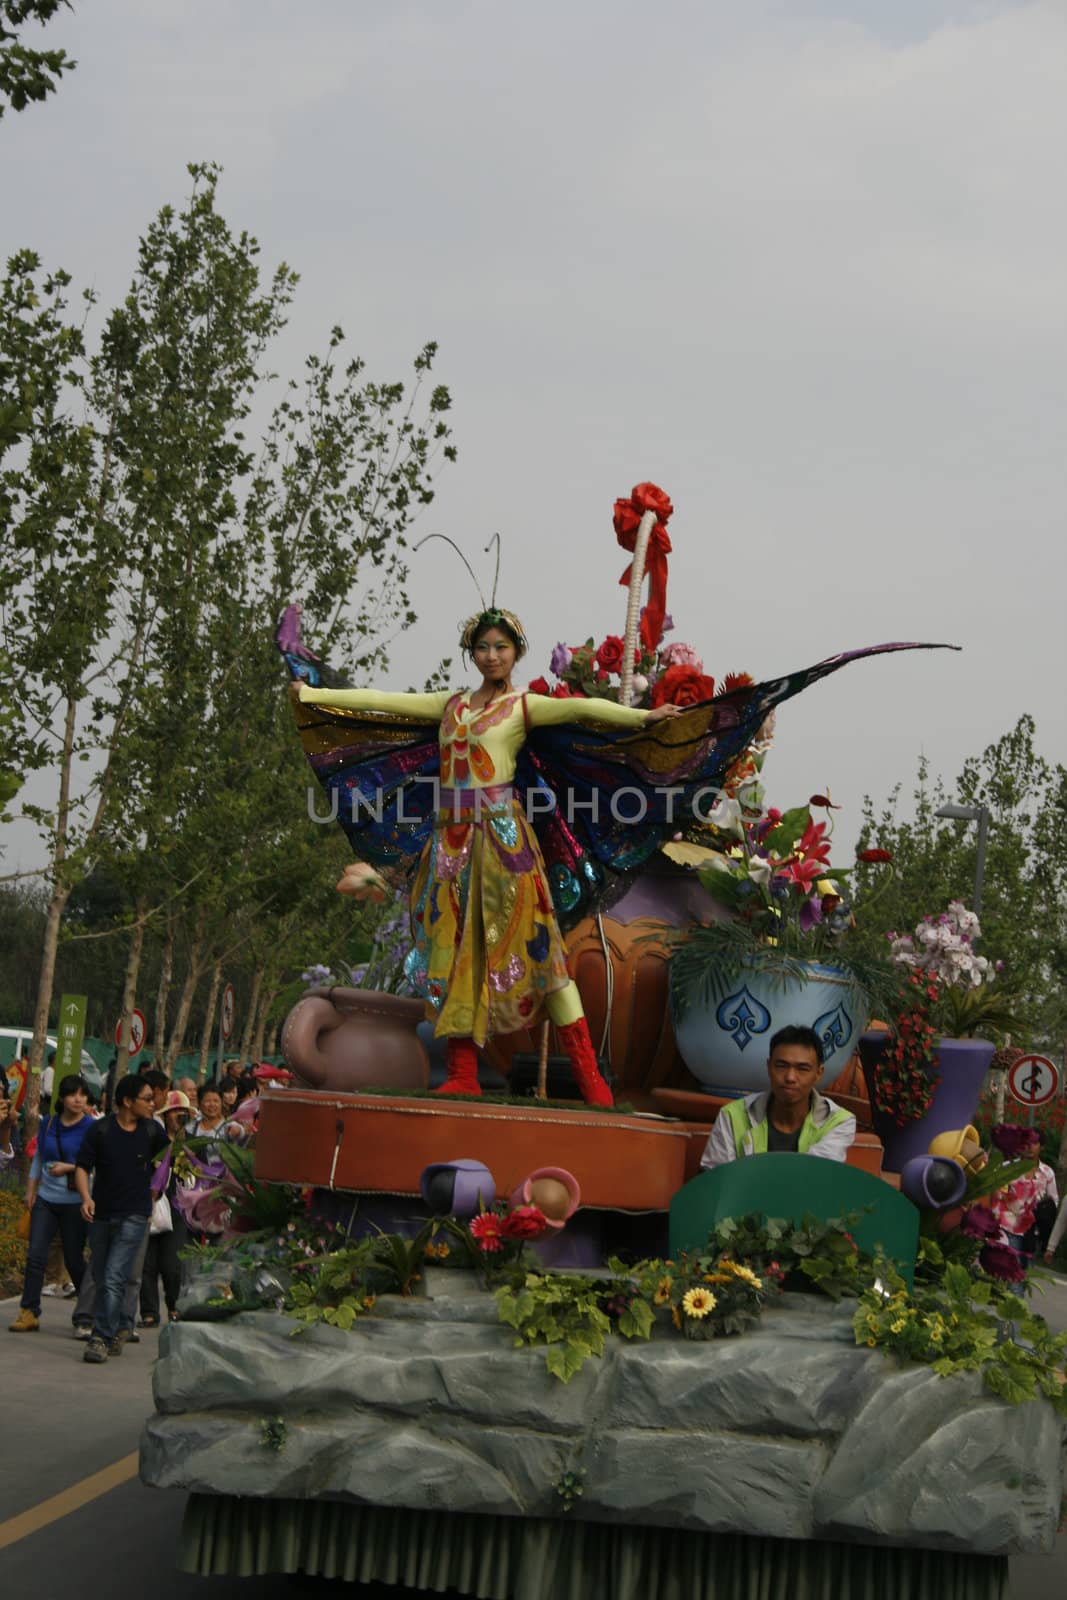 Parade at the Garden Expo in Xi'an by koep